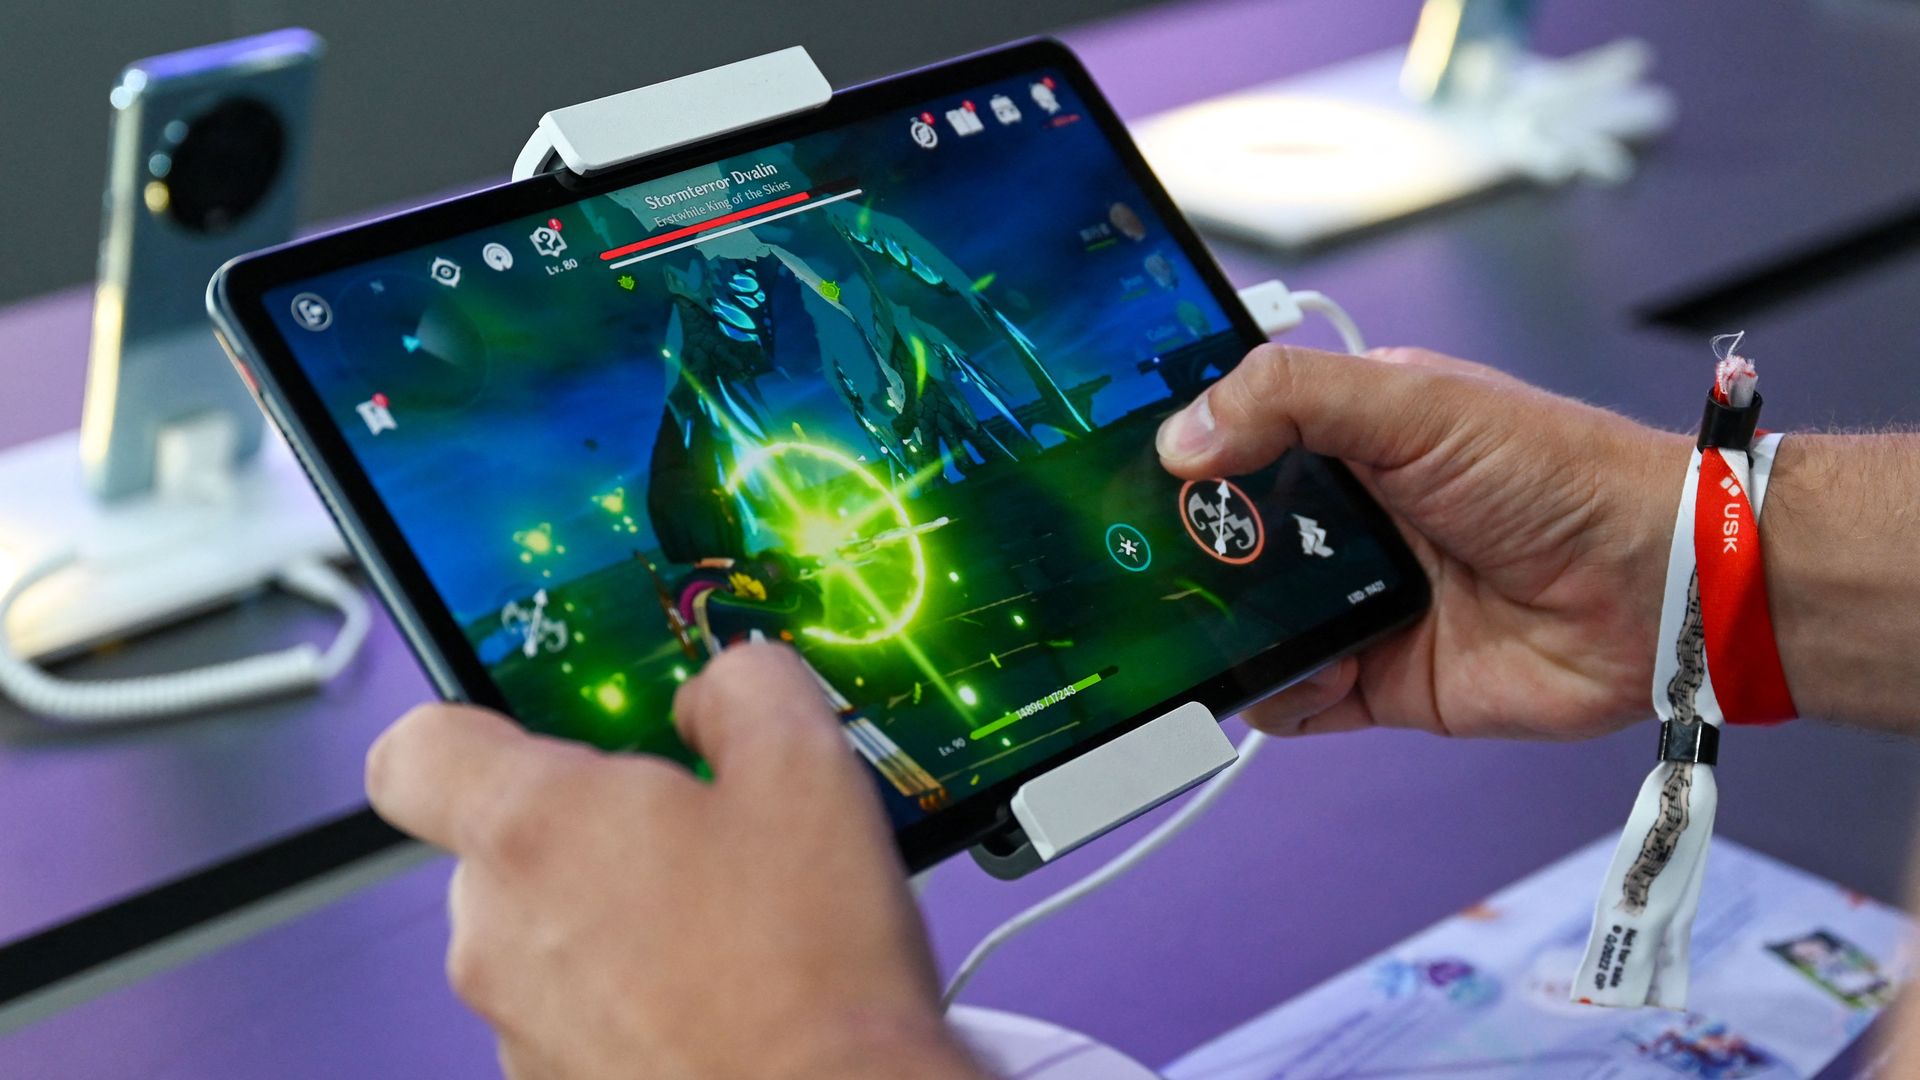 Close-up photo of person's hands and the tablet they're playing a video game on